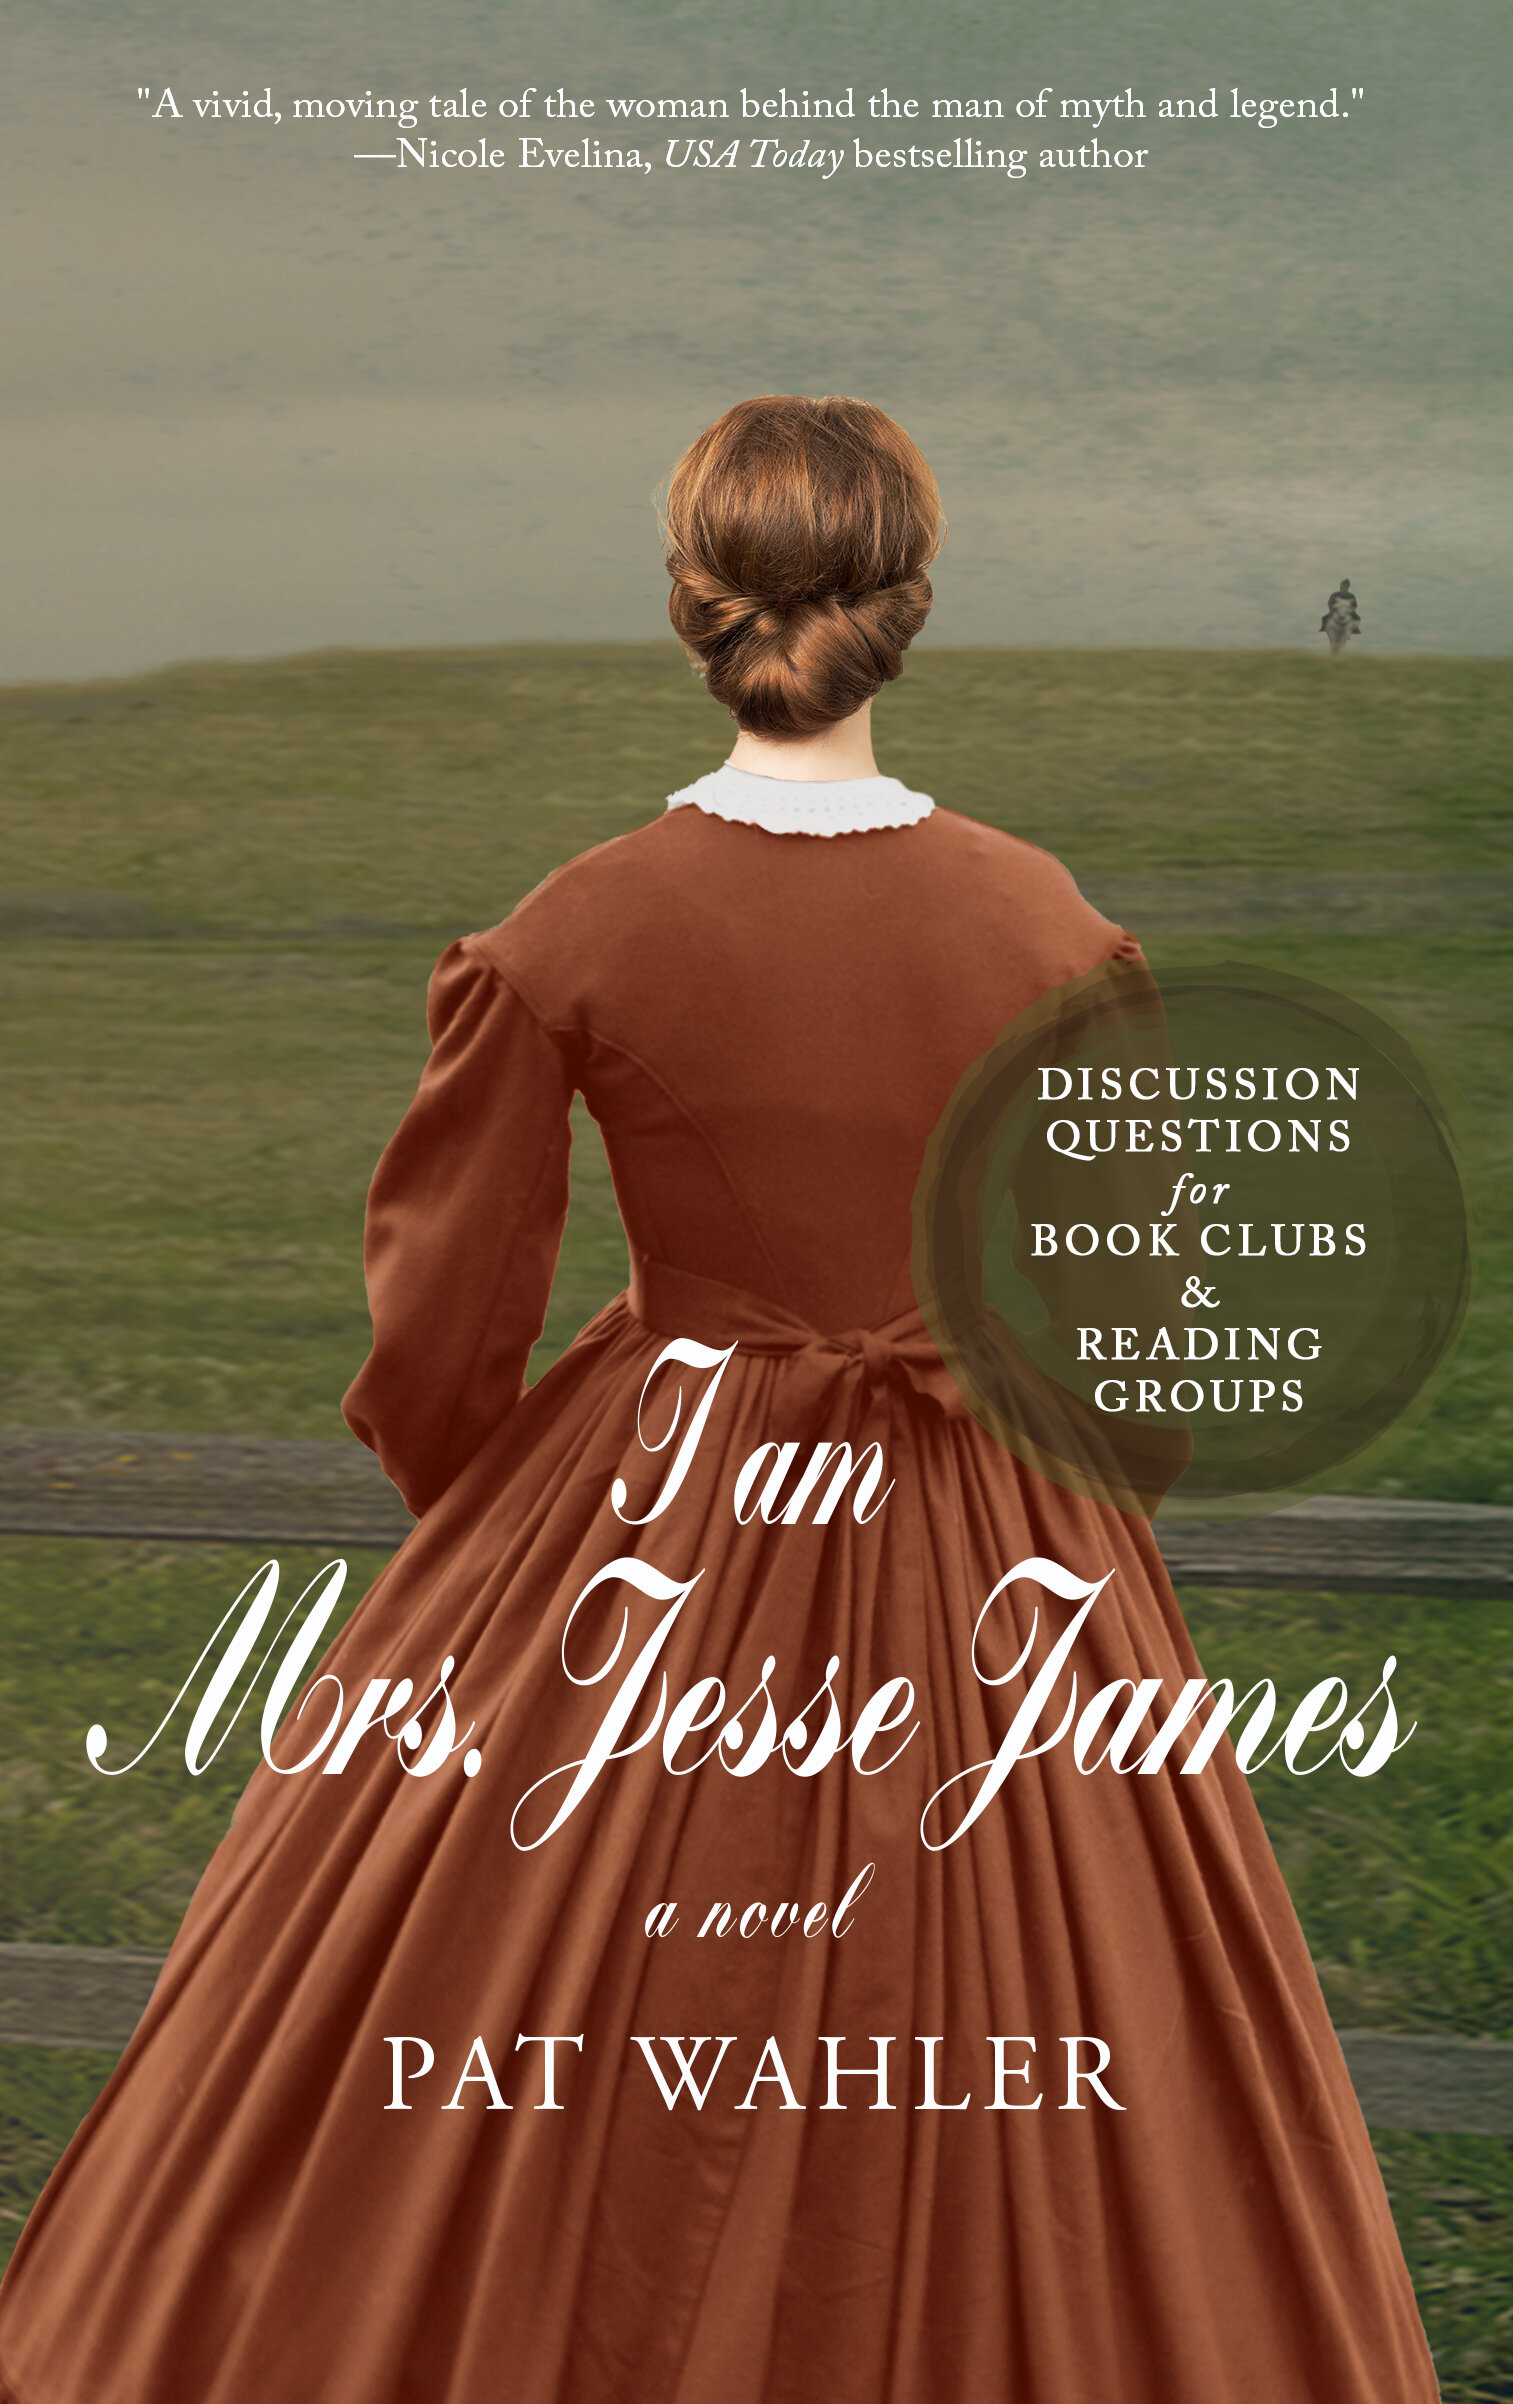 I am Mrs Jesse James NEW FRONT COVER.jpg